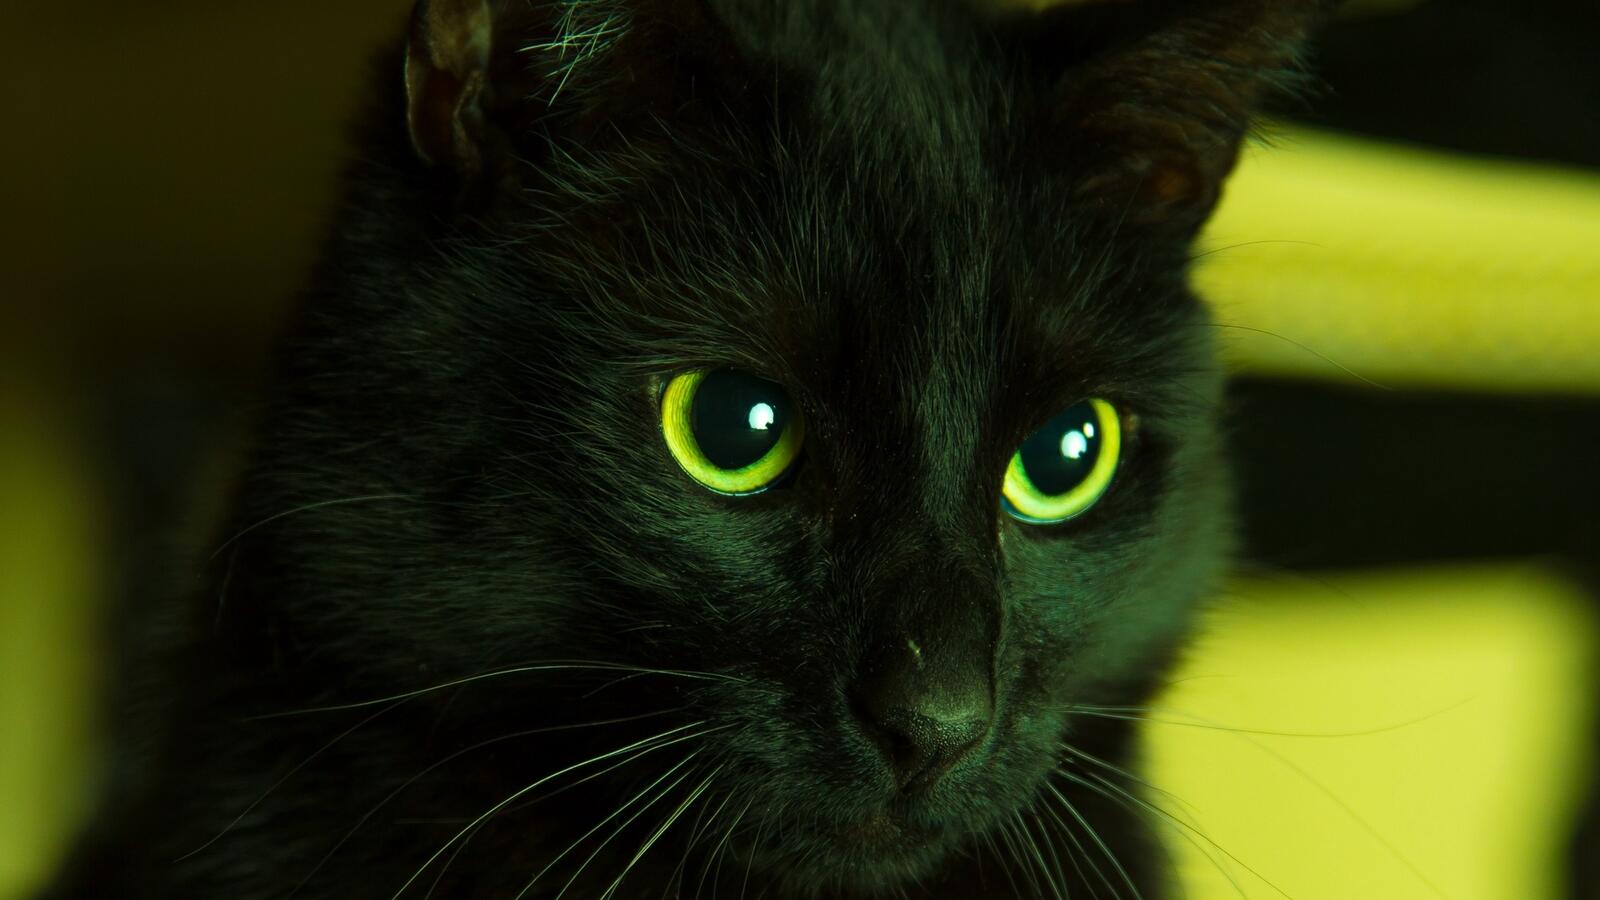 Free photo Black cat with green eyes